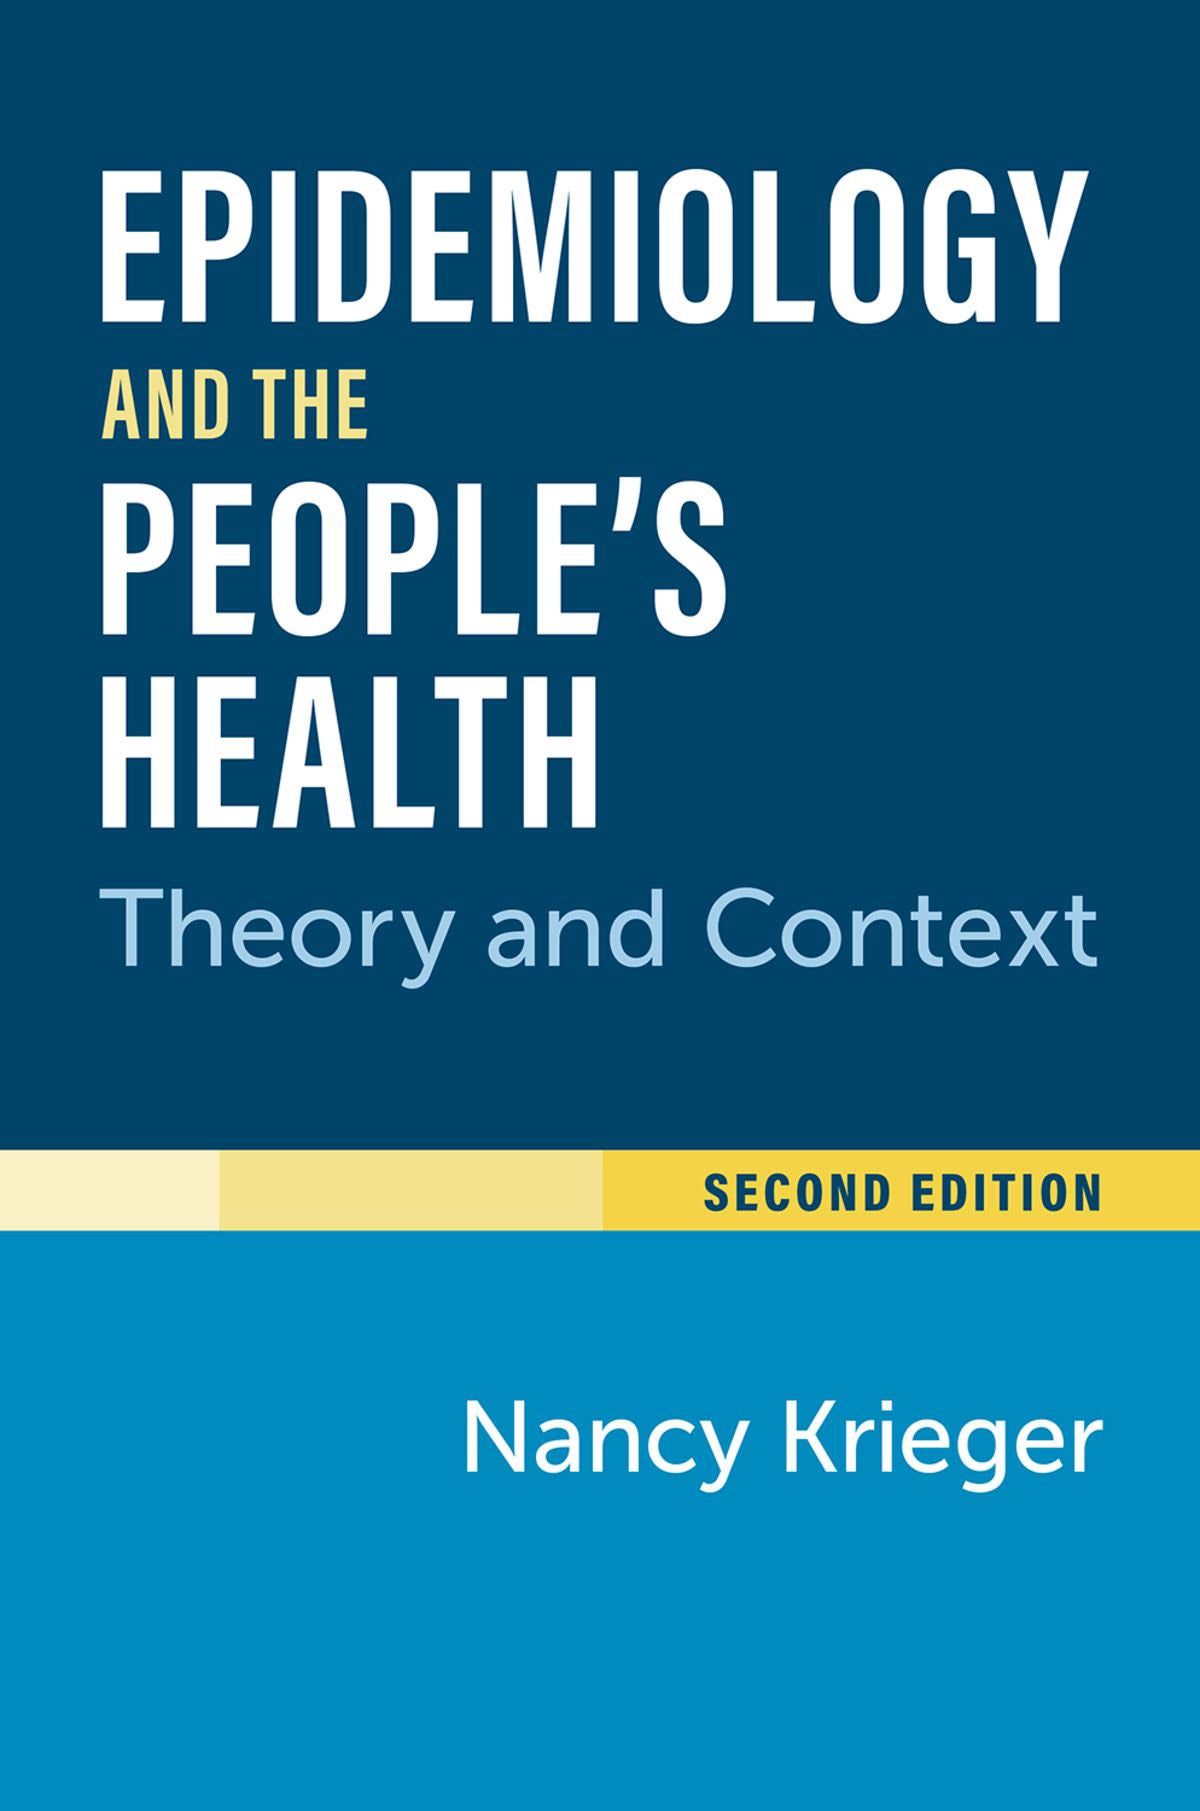 Book cover: Epidemiology and the People's Heath: Theory and Content, second edition, by Nancy Krieger